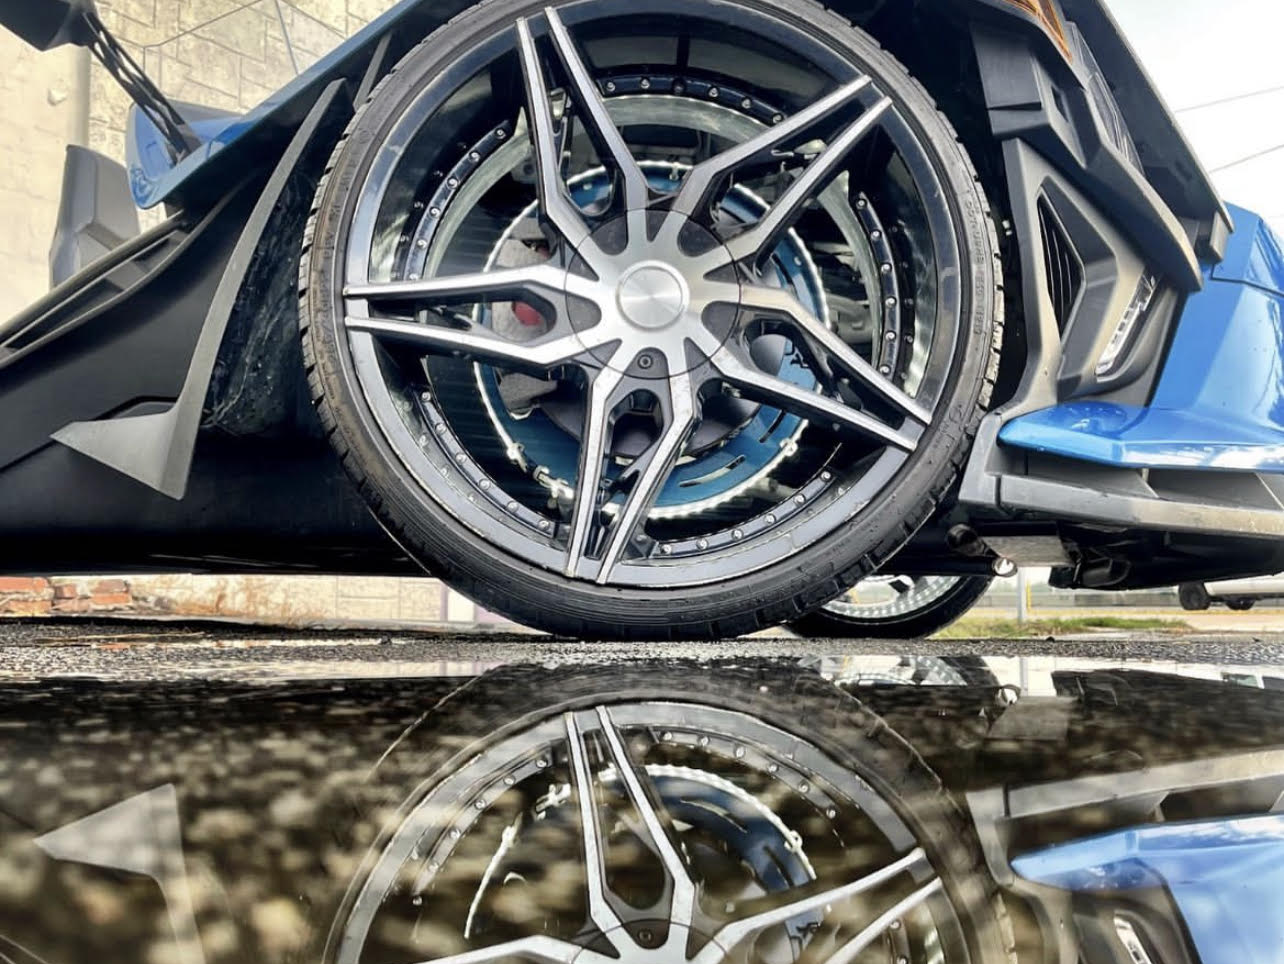 A close up of a car wheel with a reflection in the water.